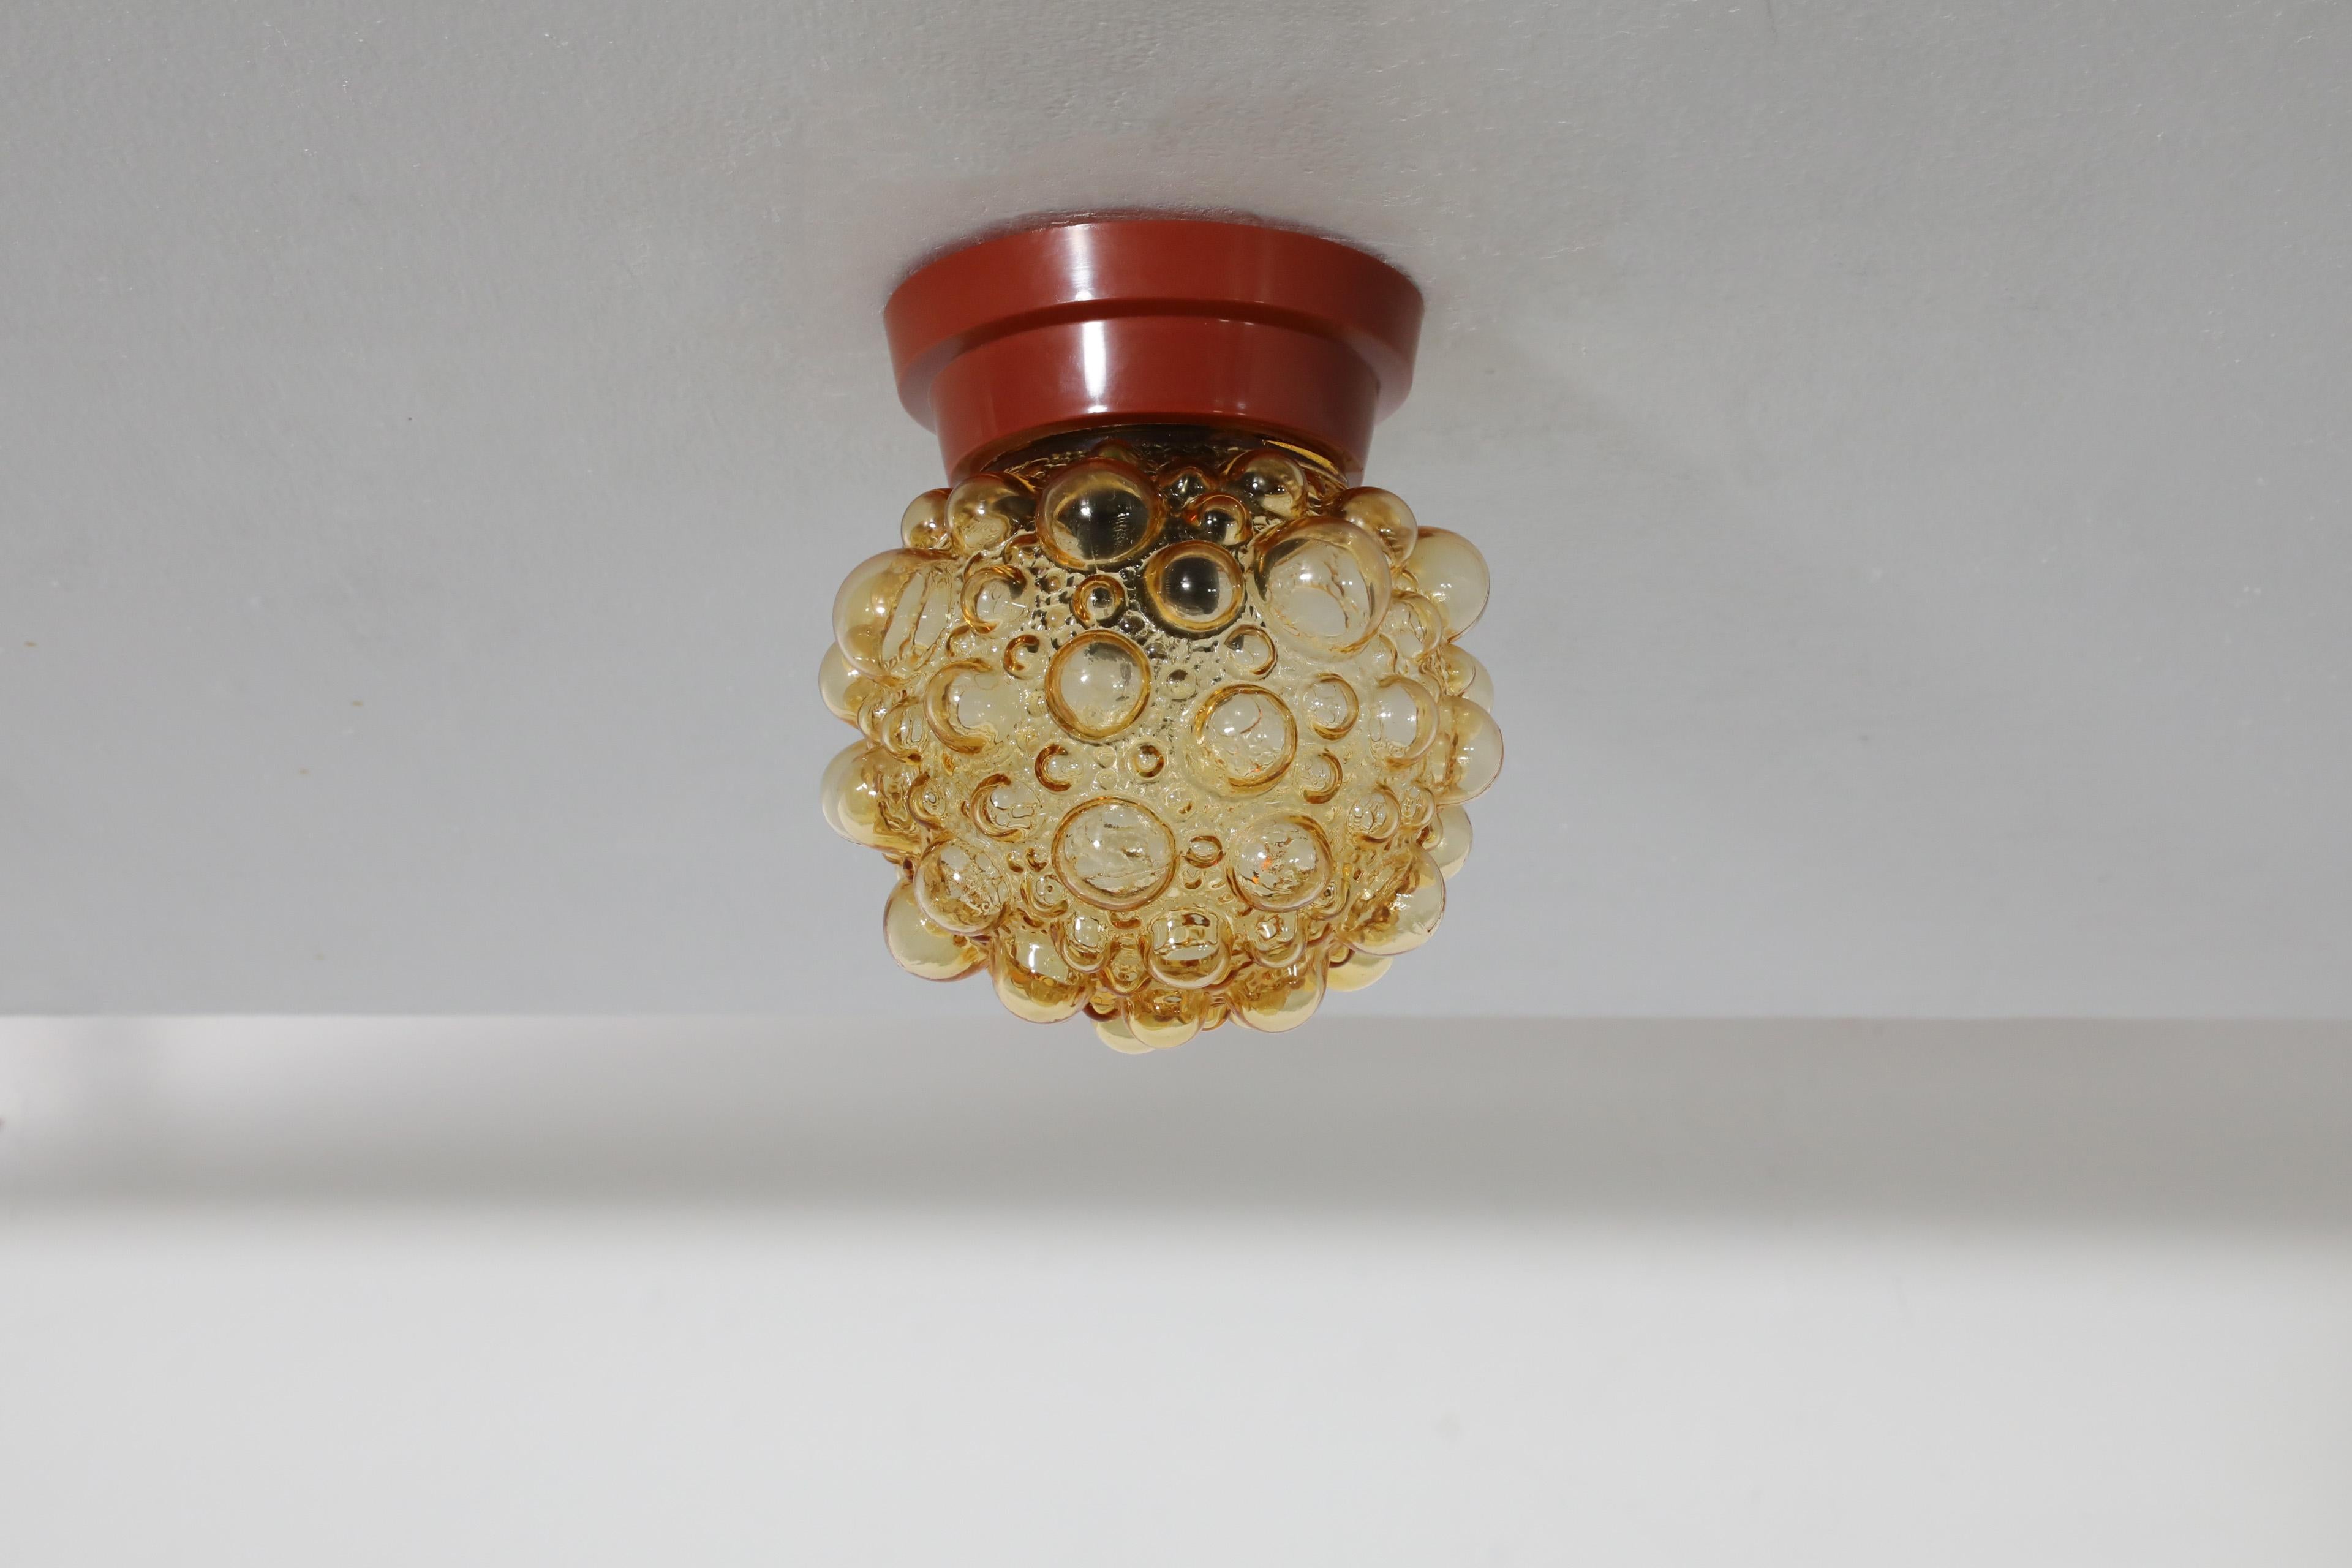 Mid-Century ceiling or wall light with amber bubble globe by Helena Tynell for Glashütte Limburg, 1940's-1950's. Stylish and funky this versatile light adds a unique touch wherever its placed. In original condition with visible wear consistent with